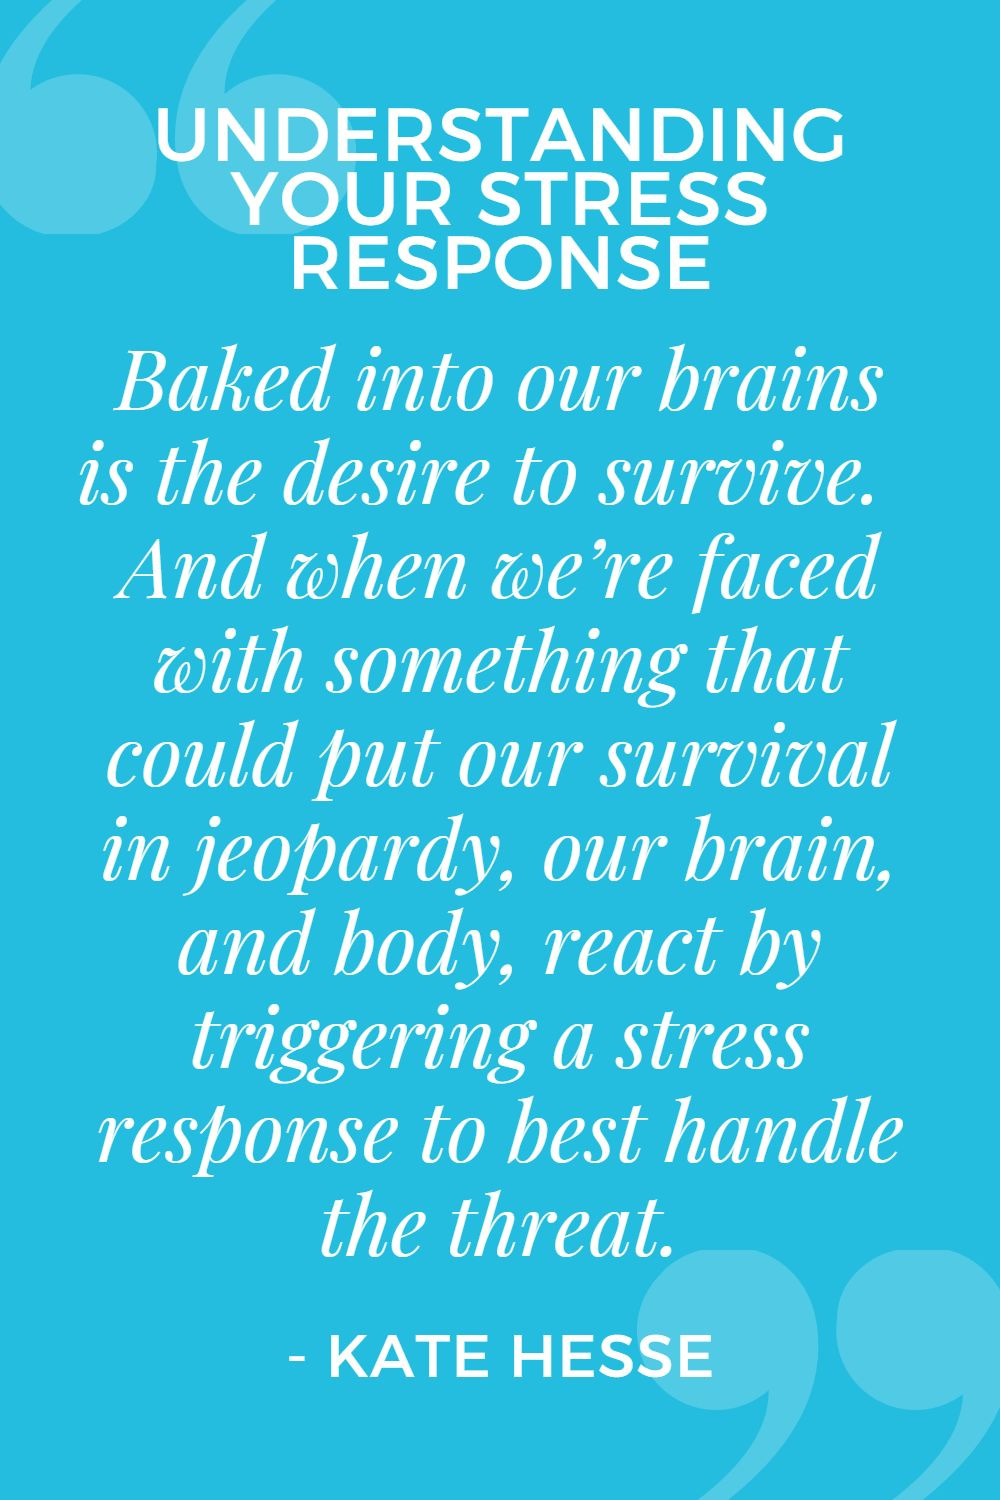 Baked into our brains is the desire to survive. And when we're faced with something that could put our survival in jeopardy, our brain, and body, react by triggering a stress response to best handle the threat.